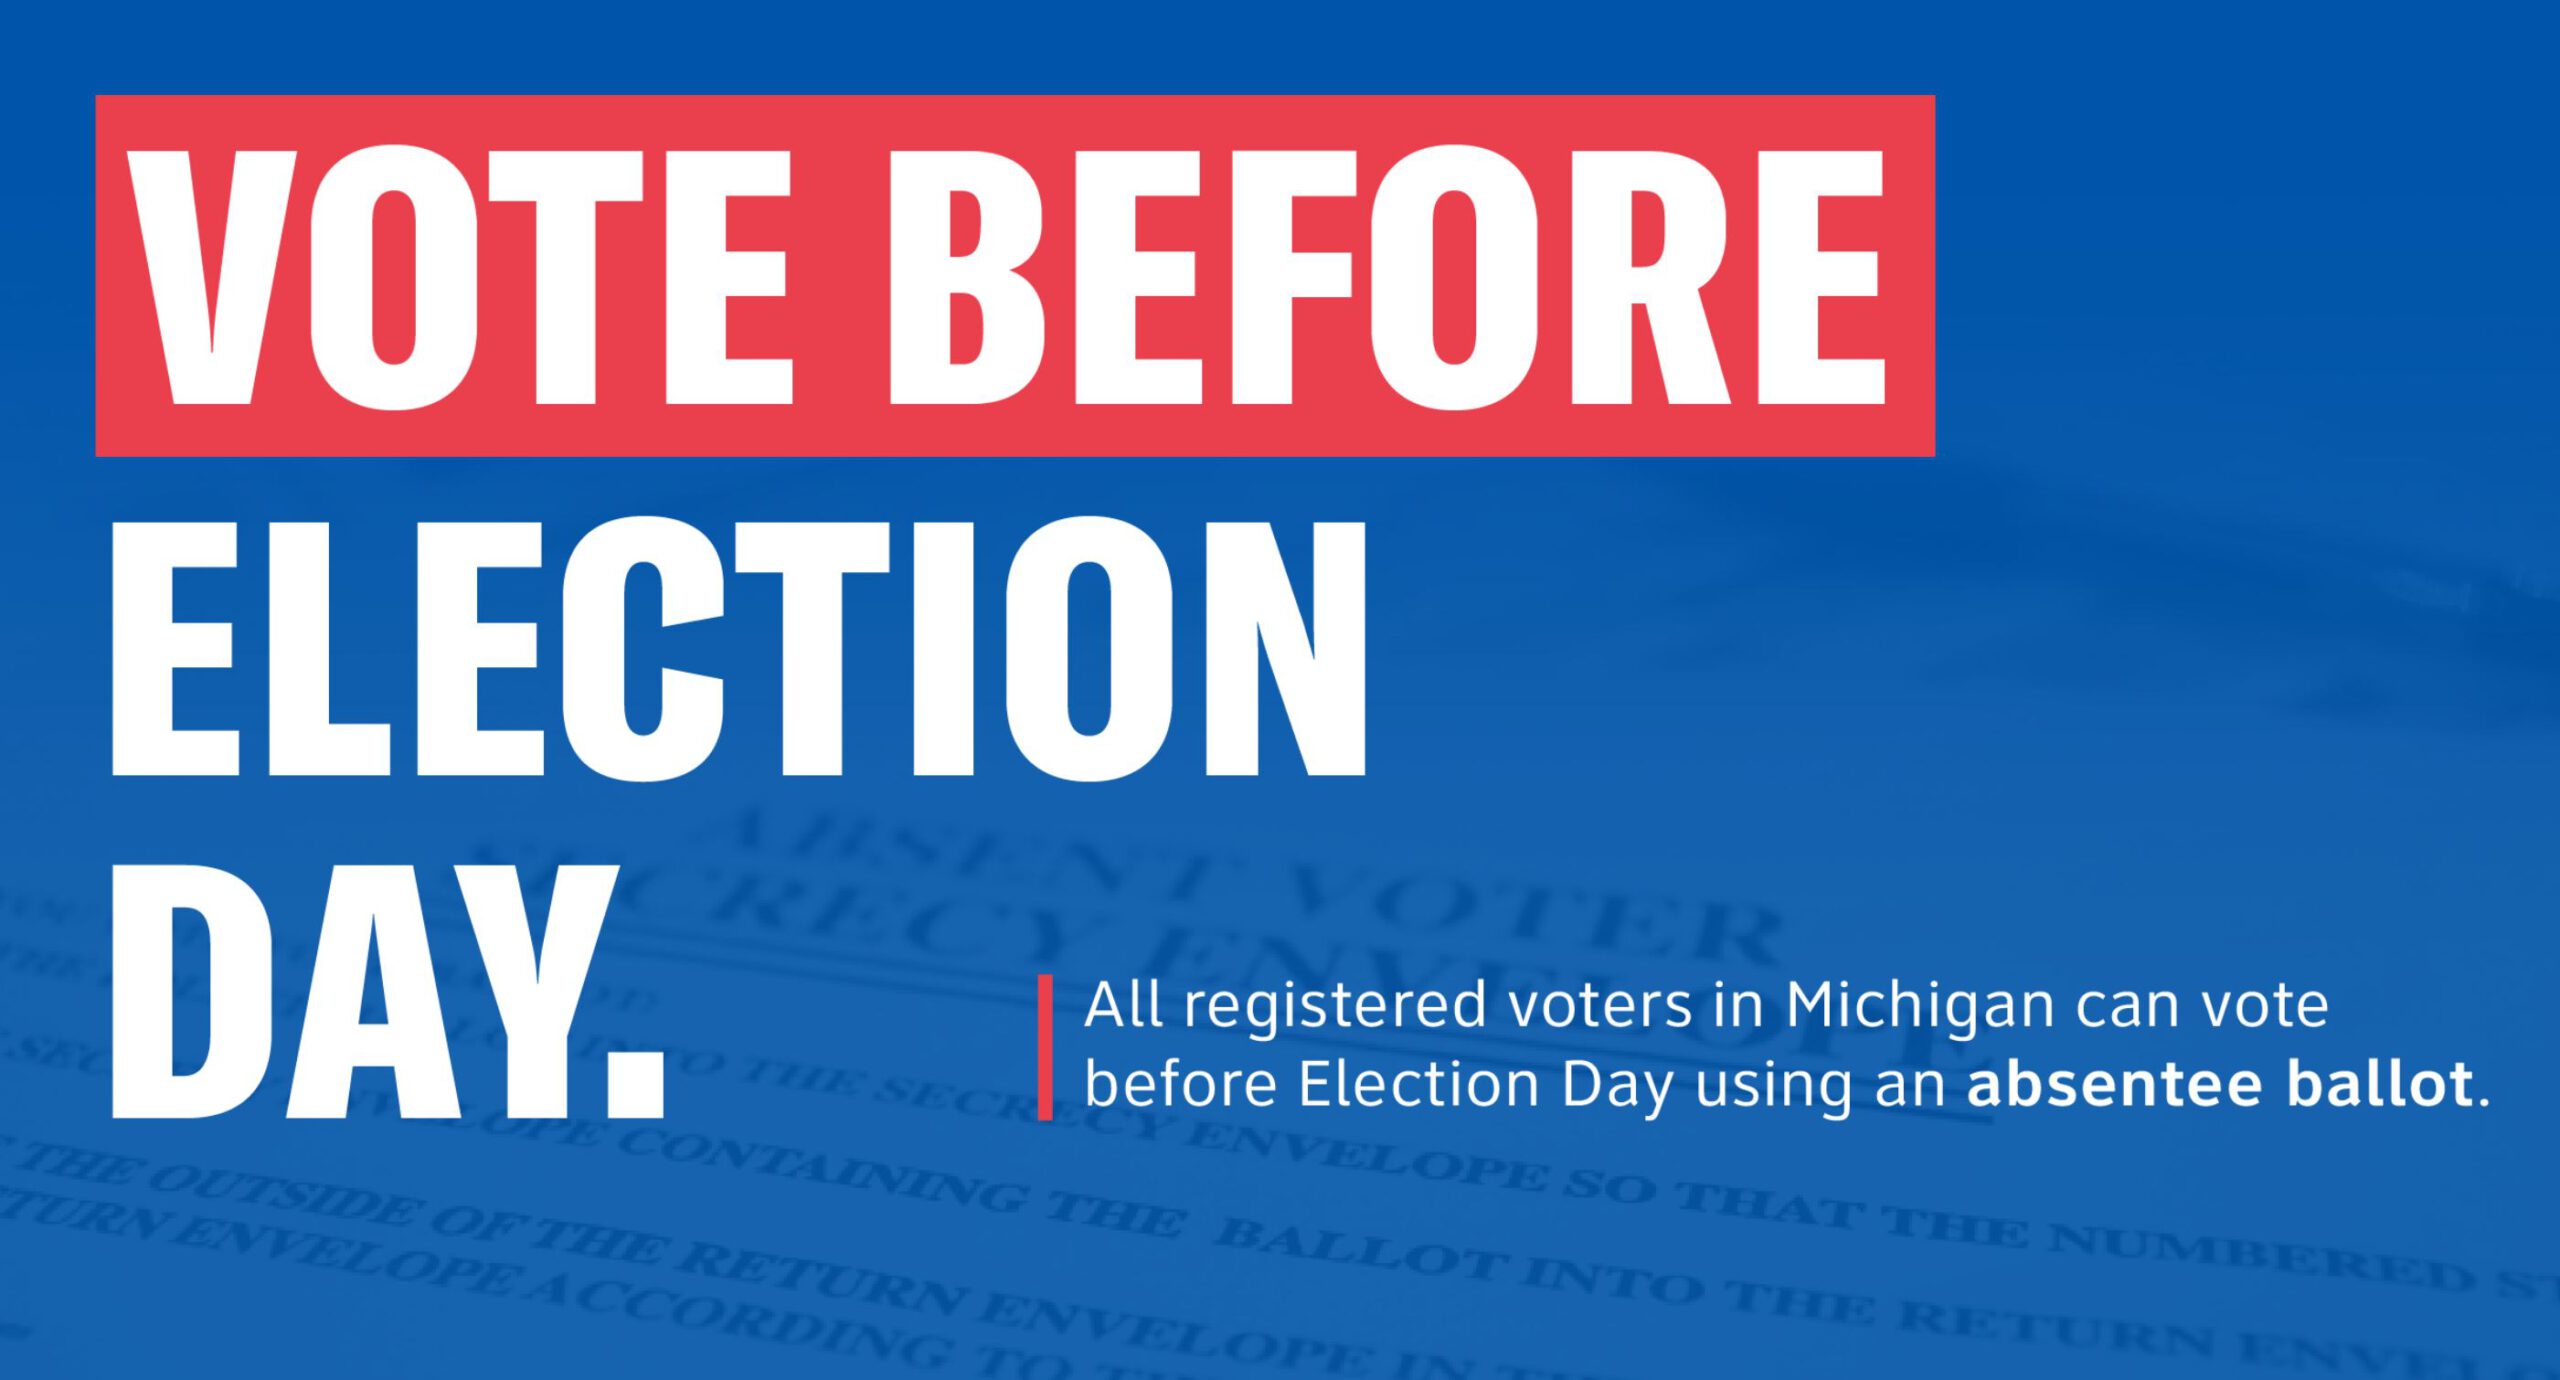 Early Voting Begins in Michigan on September 29th!